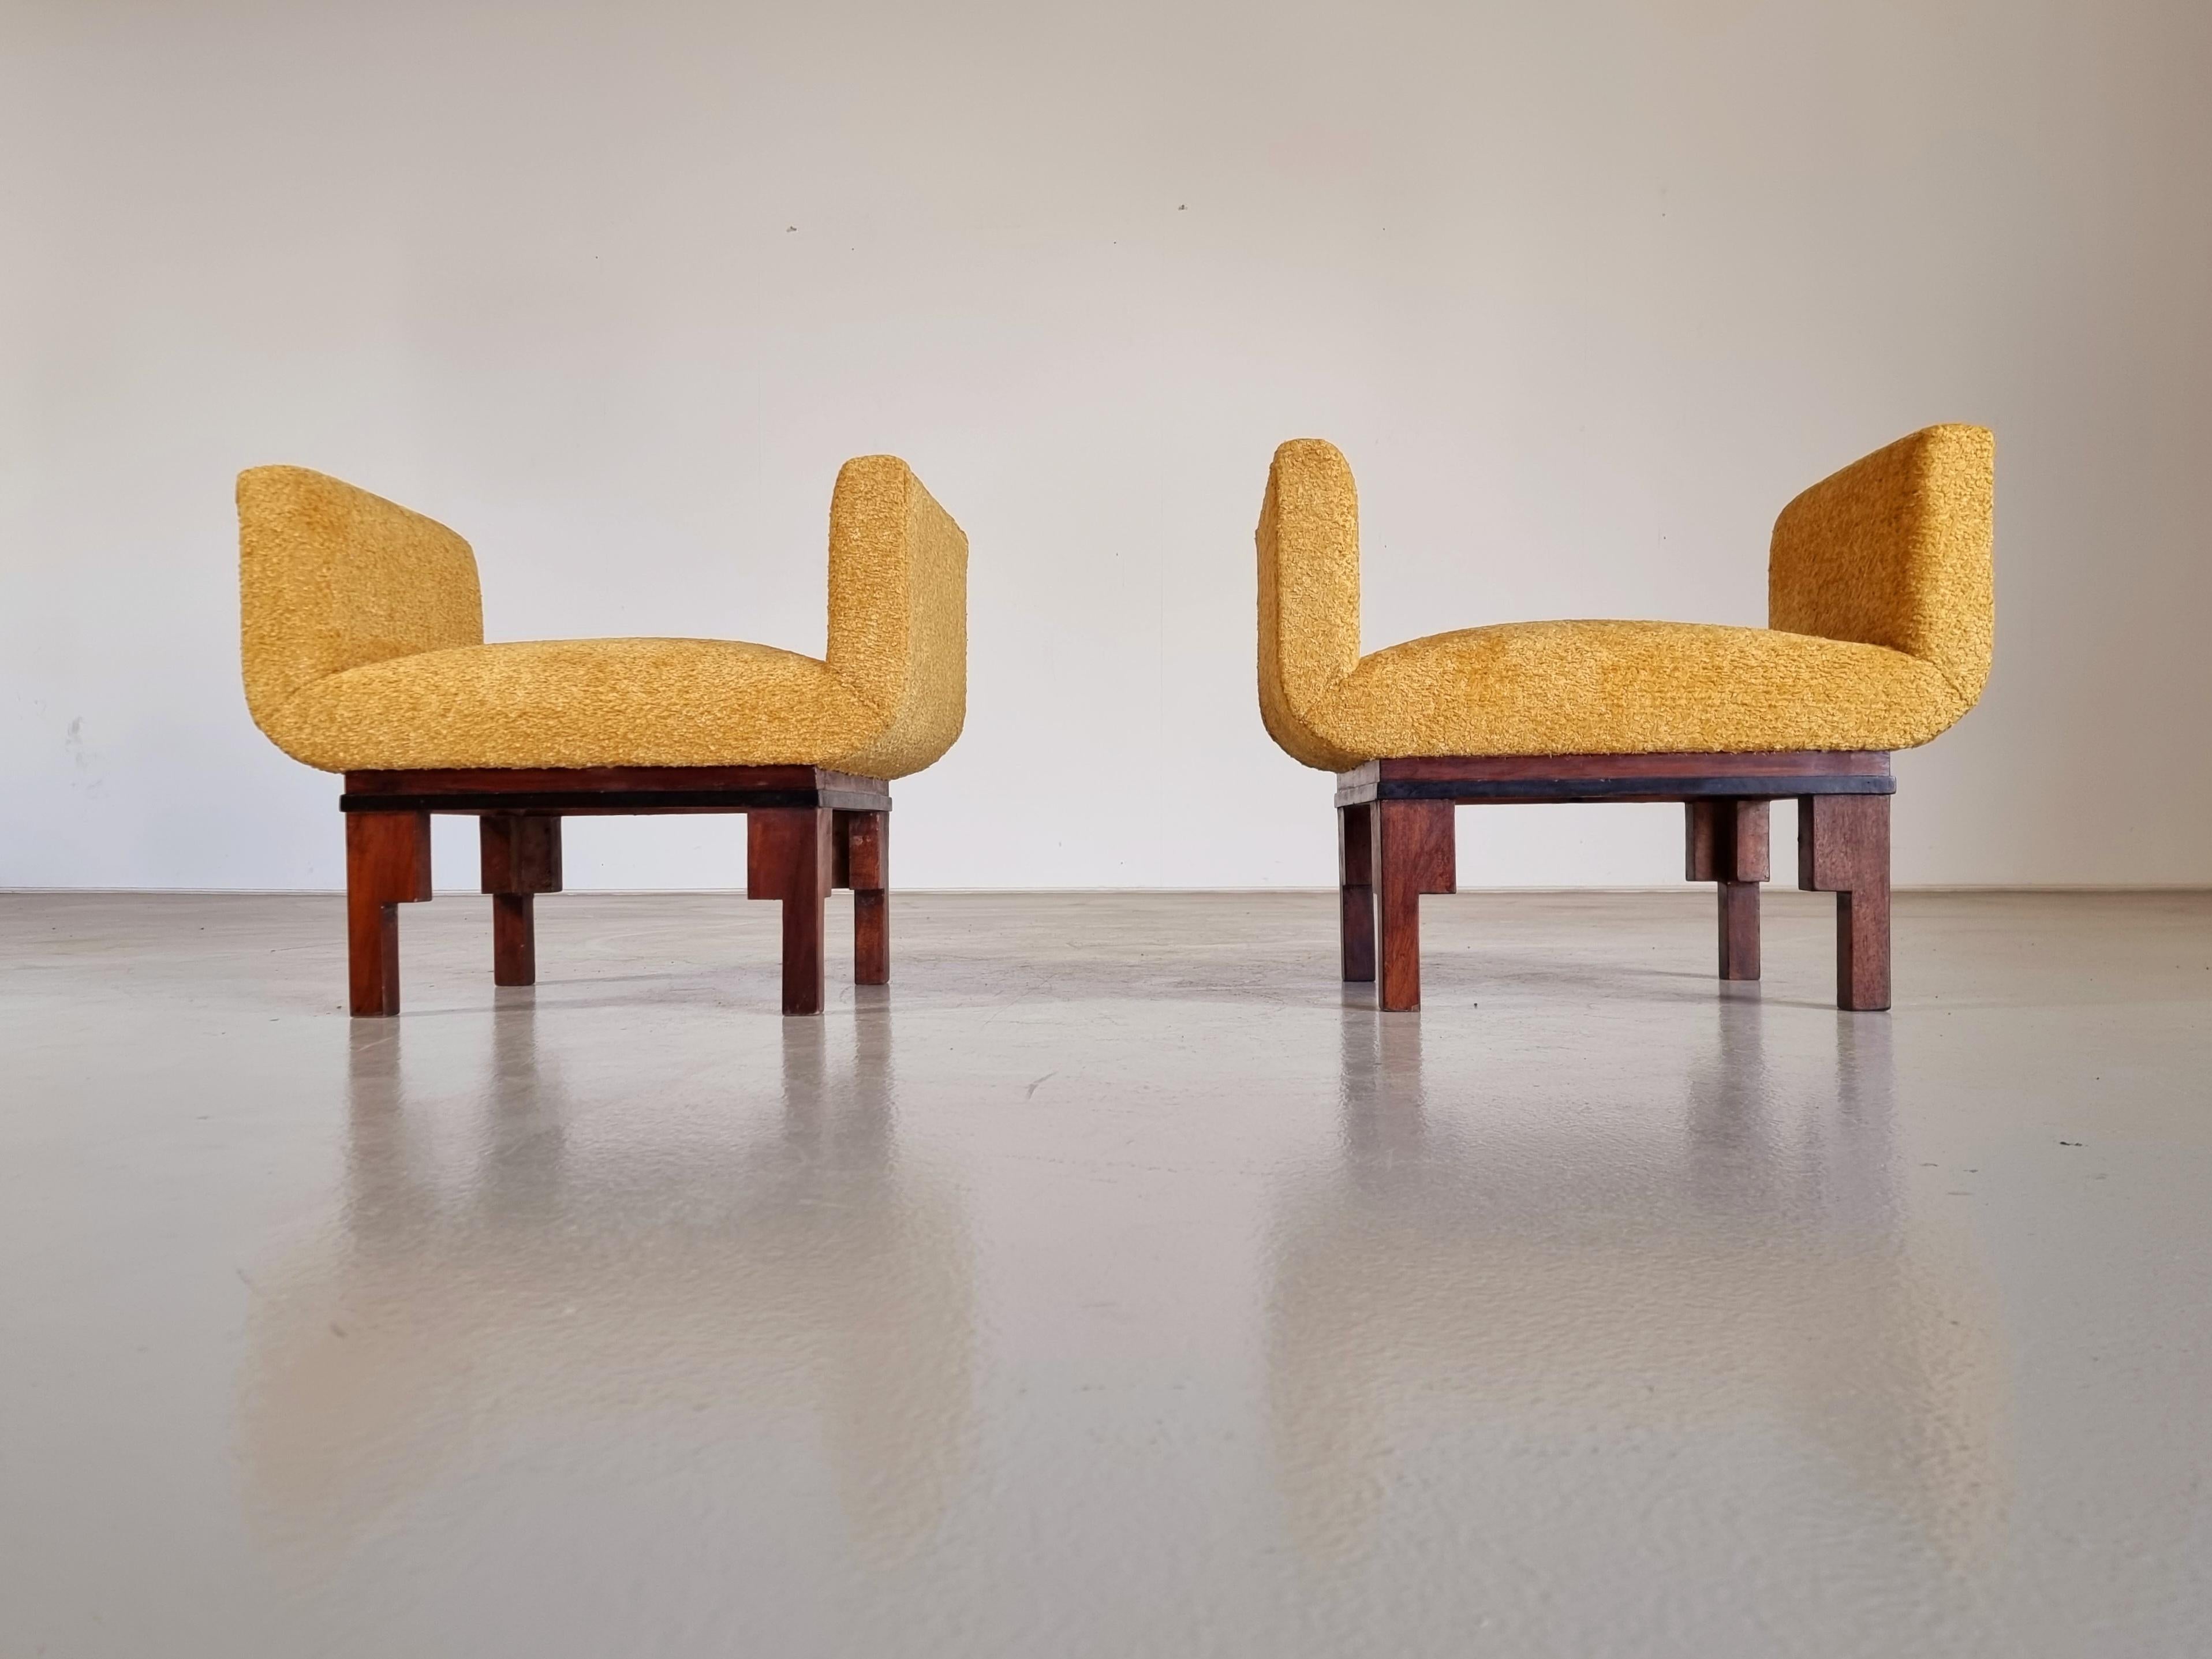 This Pair of Art Deco-style benches from the 1960s. Reupholstered in a high-quality boucle. The base is made of walnut. The set is perfect if you want to bring a classy look into your home. A timeless piece that is a perfect complement to the master